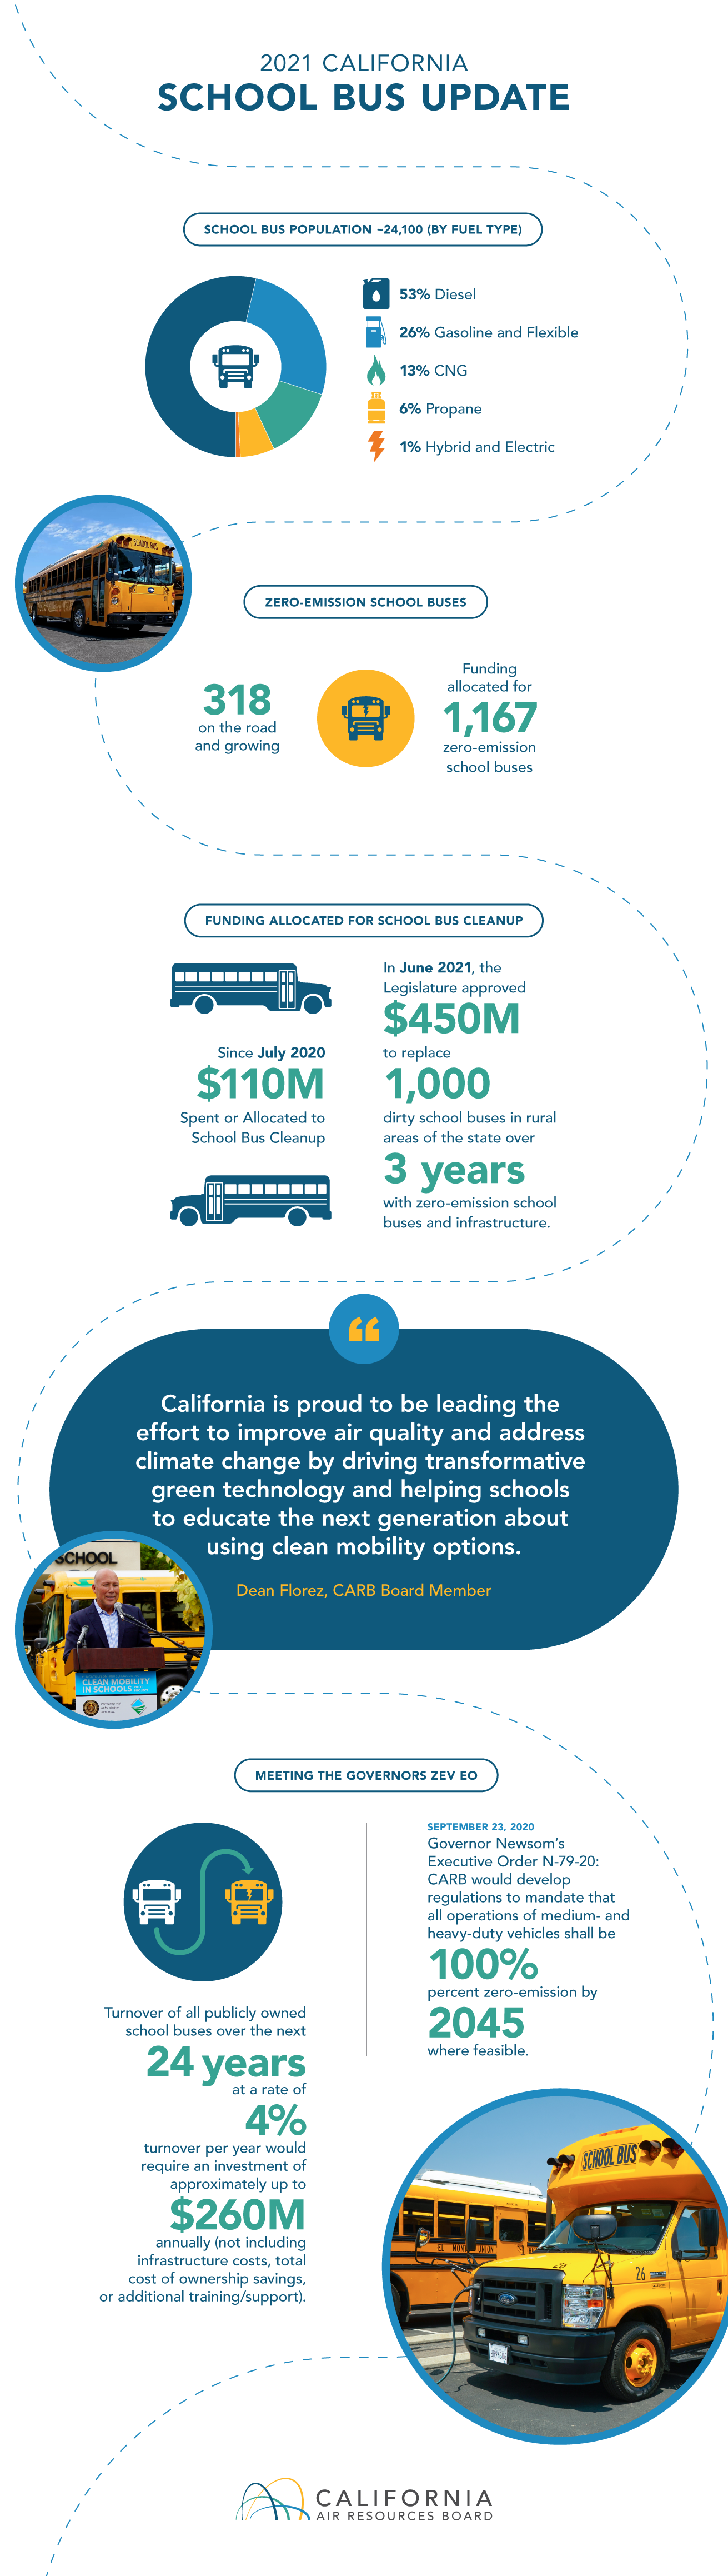 2021 California School Bus update. School bus population ~24,100 (by fuel type): 53% Diesel, 26% Gasoline and Flexible, 13% CNG, 6% Propane, 1% Hybrid and Electric. Zero Emission school buses: 318 on the road and growing. 1,167 zero-emission school buses. Funding allocated for school bus cleanup: in June 2021, the legislatrue approved $450M to replace 1,000 dirty school buses in rural areas of the state over 3 years with zero-eission school buses and infrastructure. "California is proud to be leading the effort to improve air quality and address climate change by driving transformative green technology and helping schools to educate the next generation about using clean mobility options" - Dean Florez, CARB Board Member. Meeting the Governor's ZEV EO: September 23, 2020 - Governor Newsom's Executive Order N-79-20: CARB would develop regulations to mandate that all operations of medium- and heavy-duty vehicles shall be 100% zero-emission by 2045 where feasible. Turnover of all publicly owned school buses over the next 24 years at a rate of 4% turnover would require an investment of approximately up to $260M annually (not including infrastructure costs, total cost of ownership savings, or additional training/support).